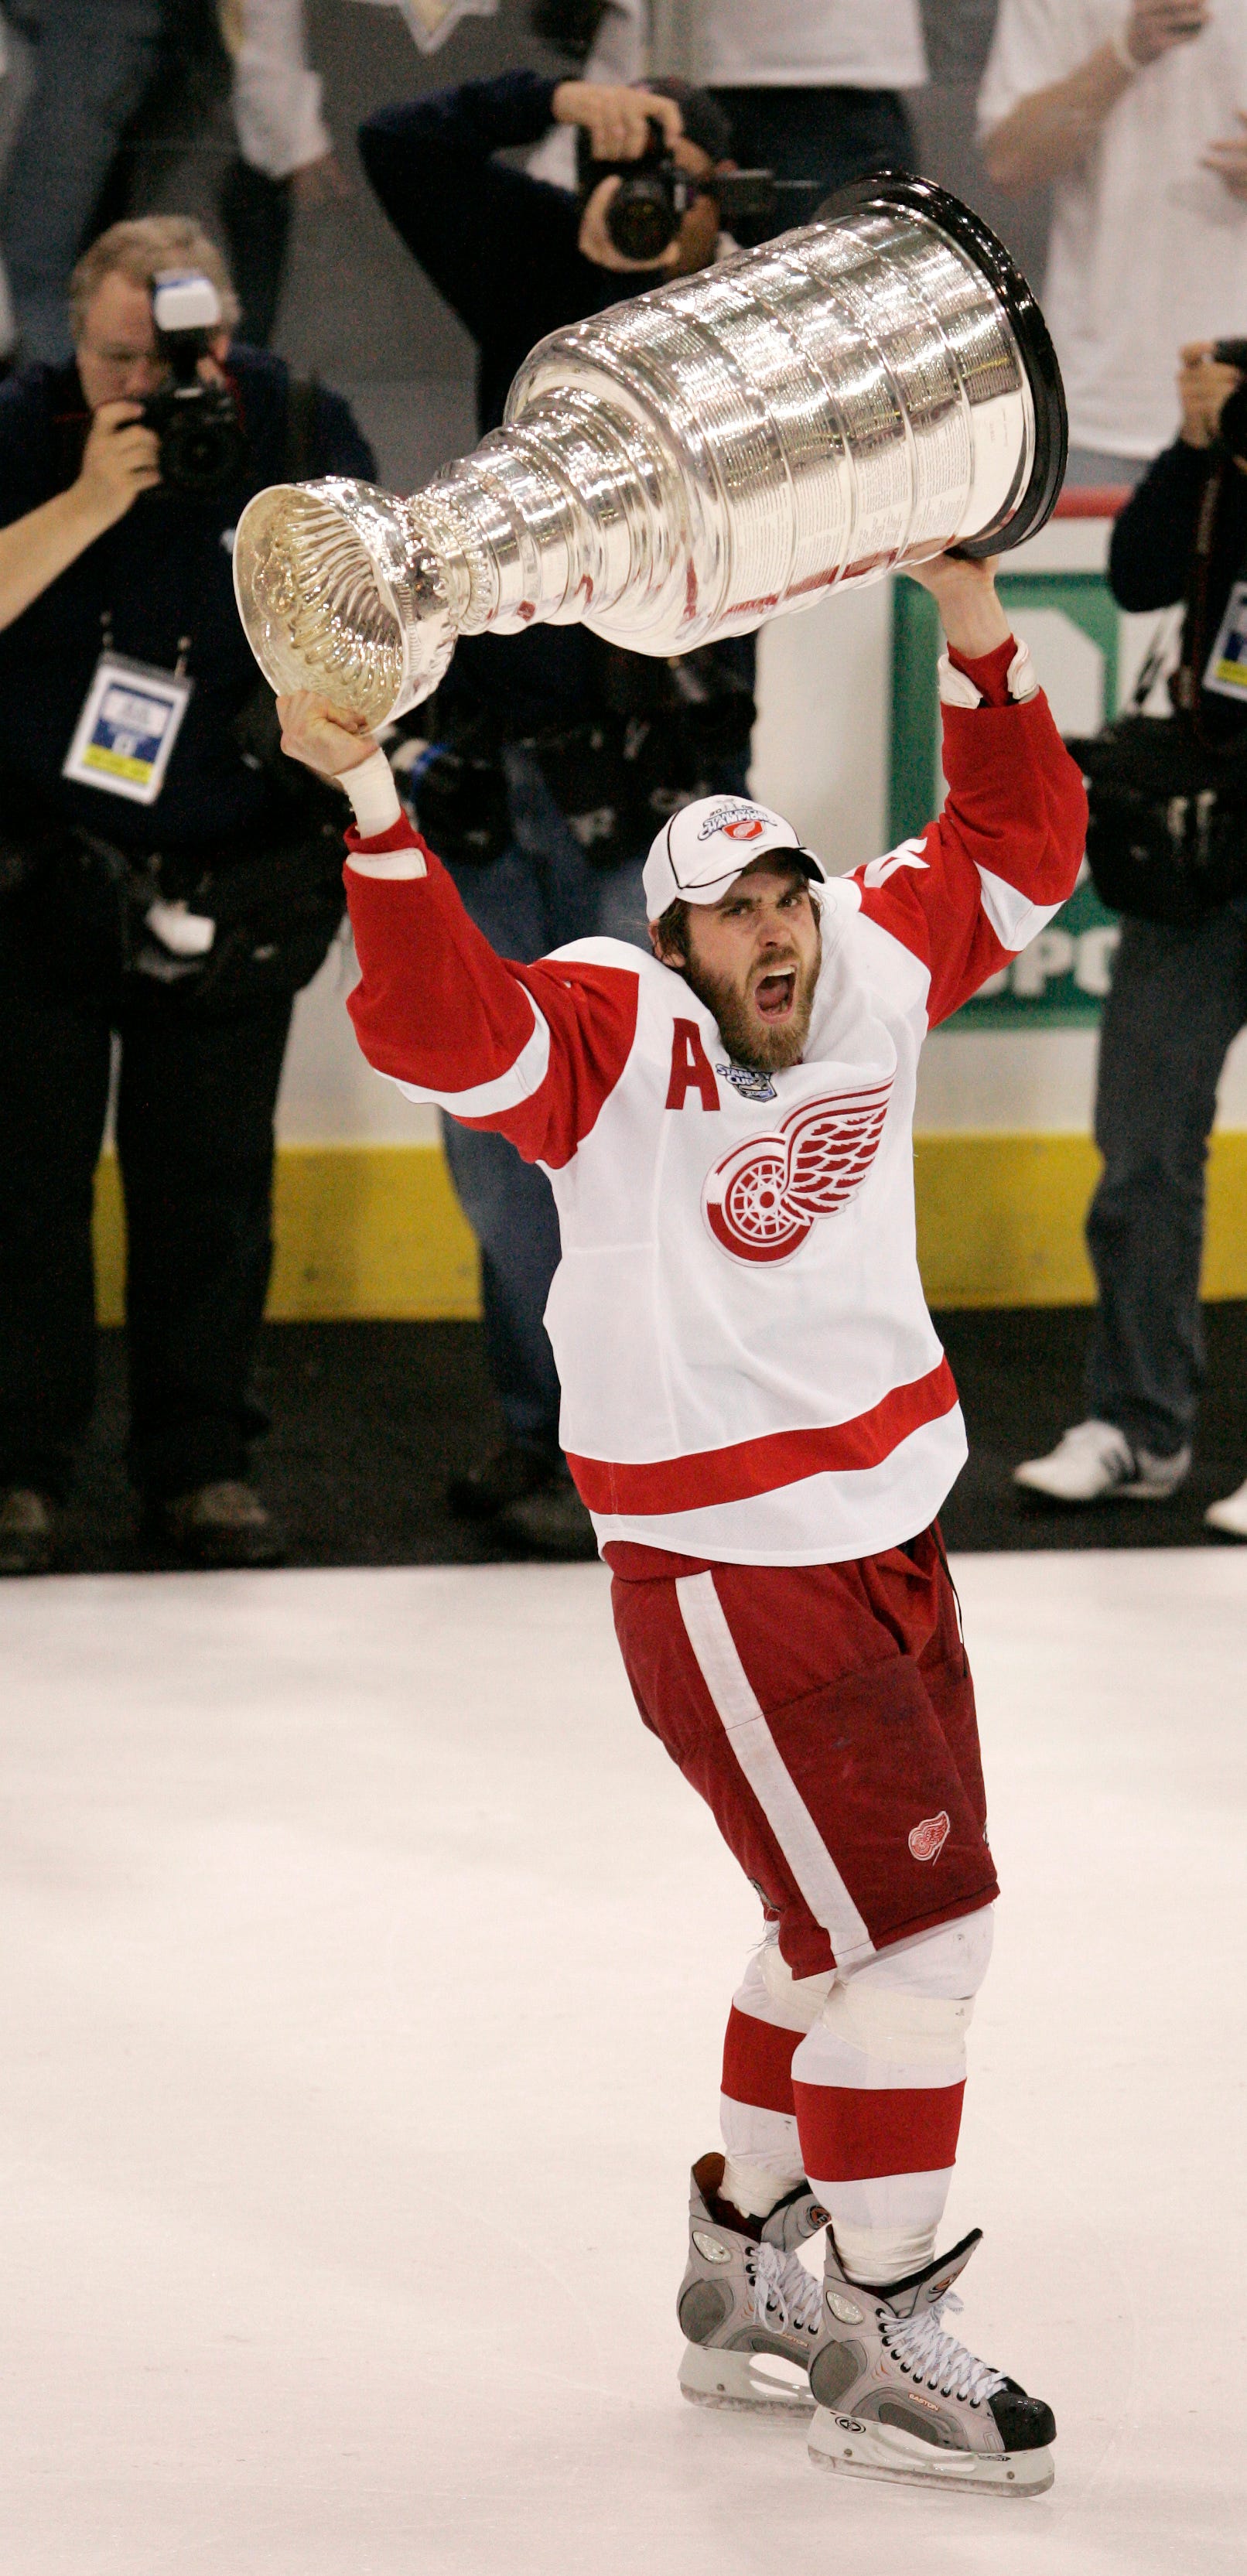 Playoff MVP Henrik Zetterberg lifts the 2008 Stanley Cup after the final buzzer of a 3-2 Cup-clinching victory over the Pittsburgh Penguins. The Red Wings won the series 4-2.